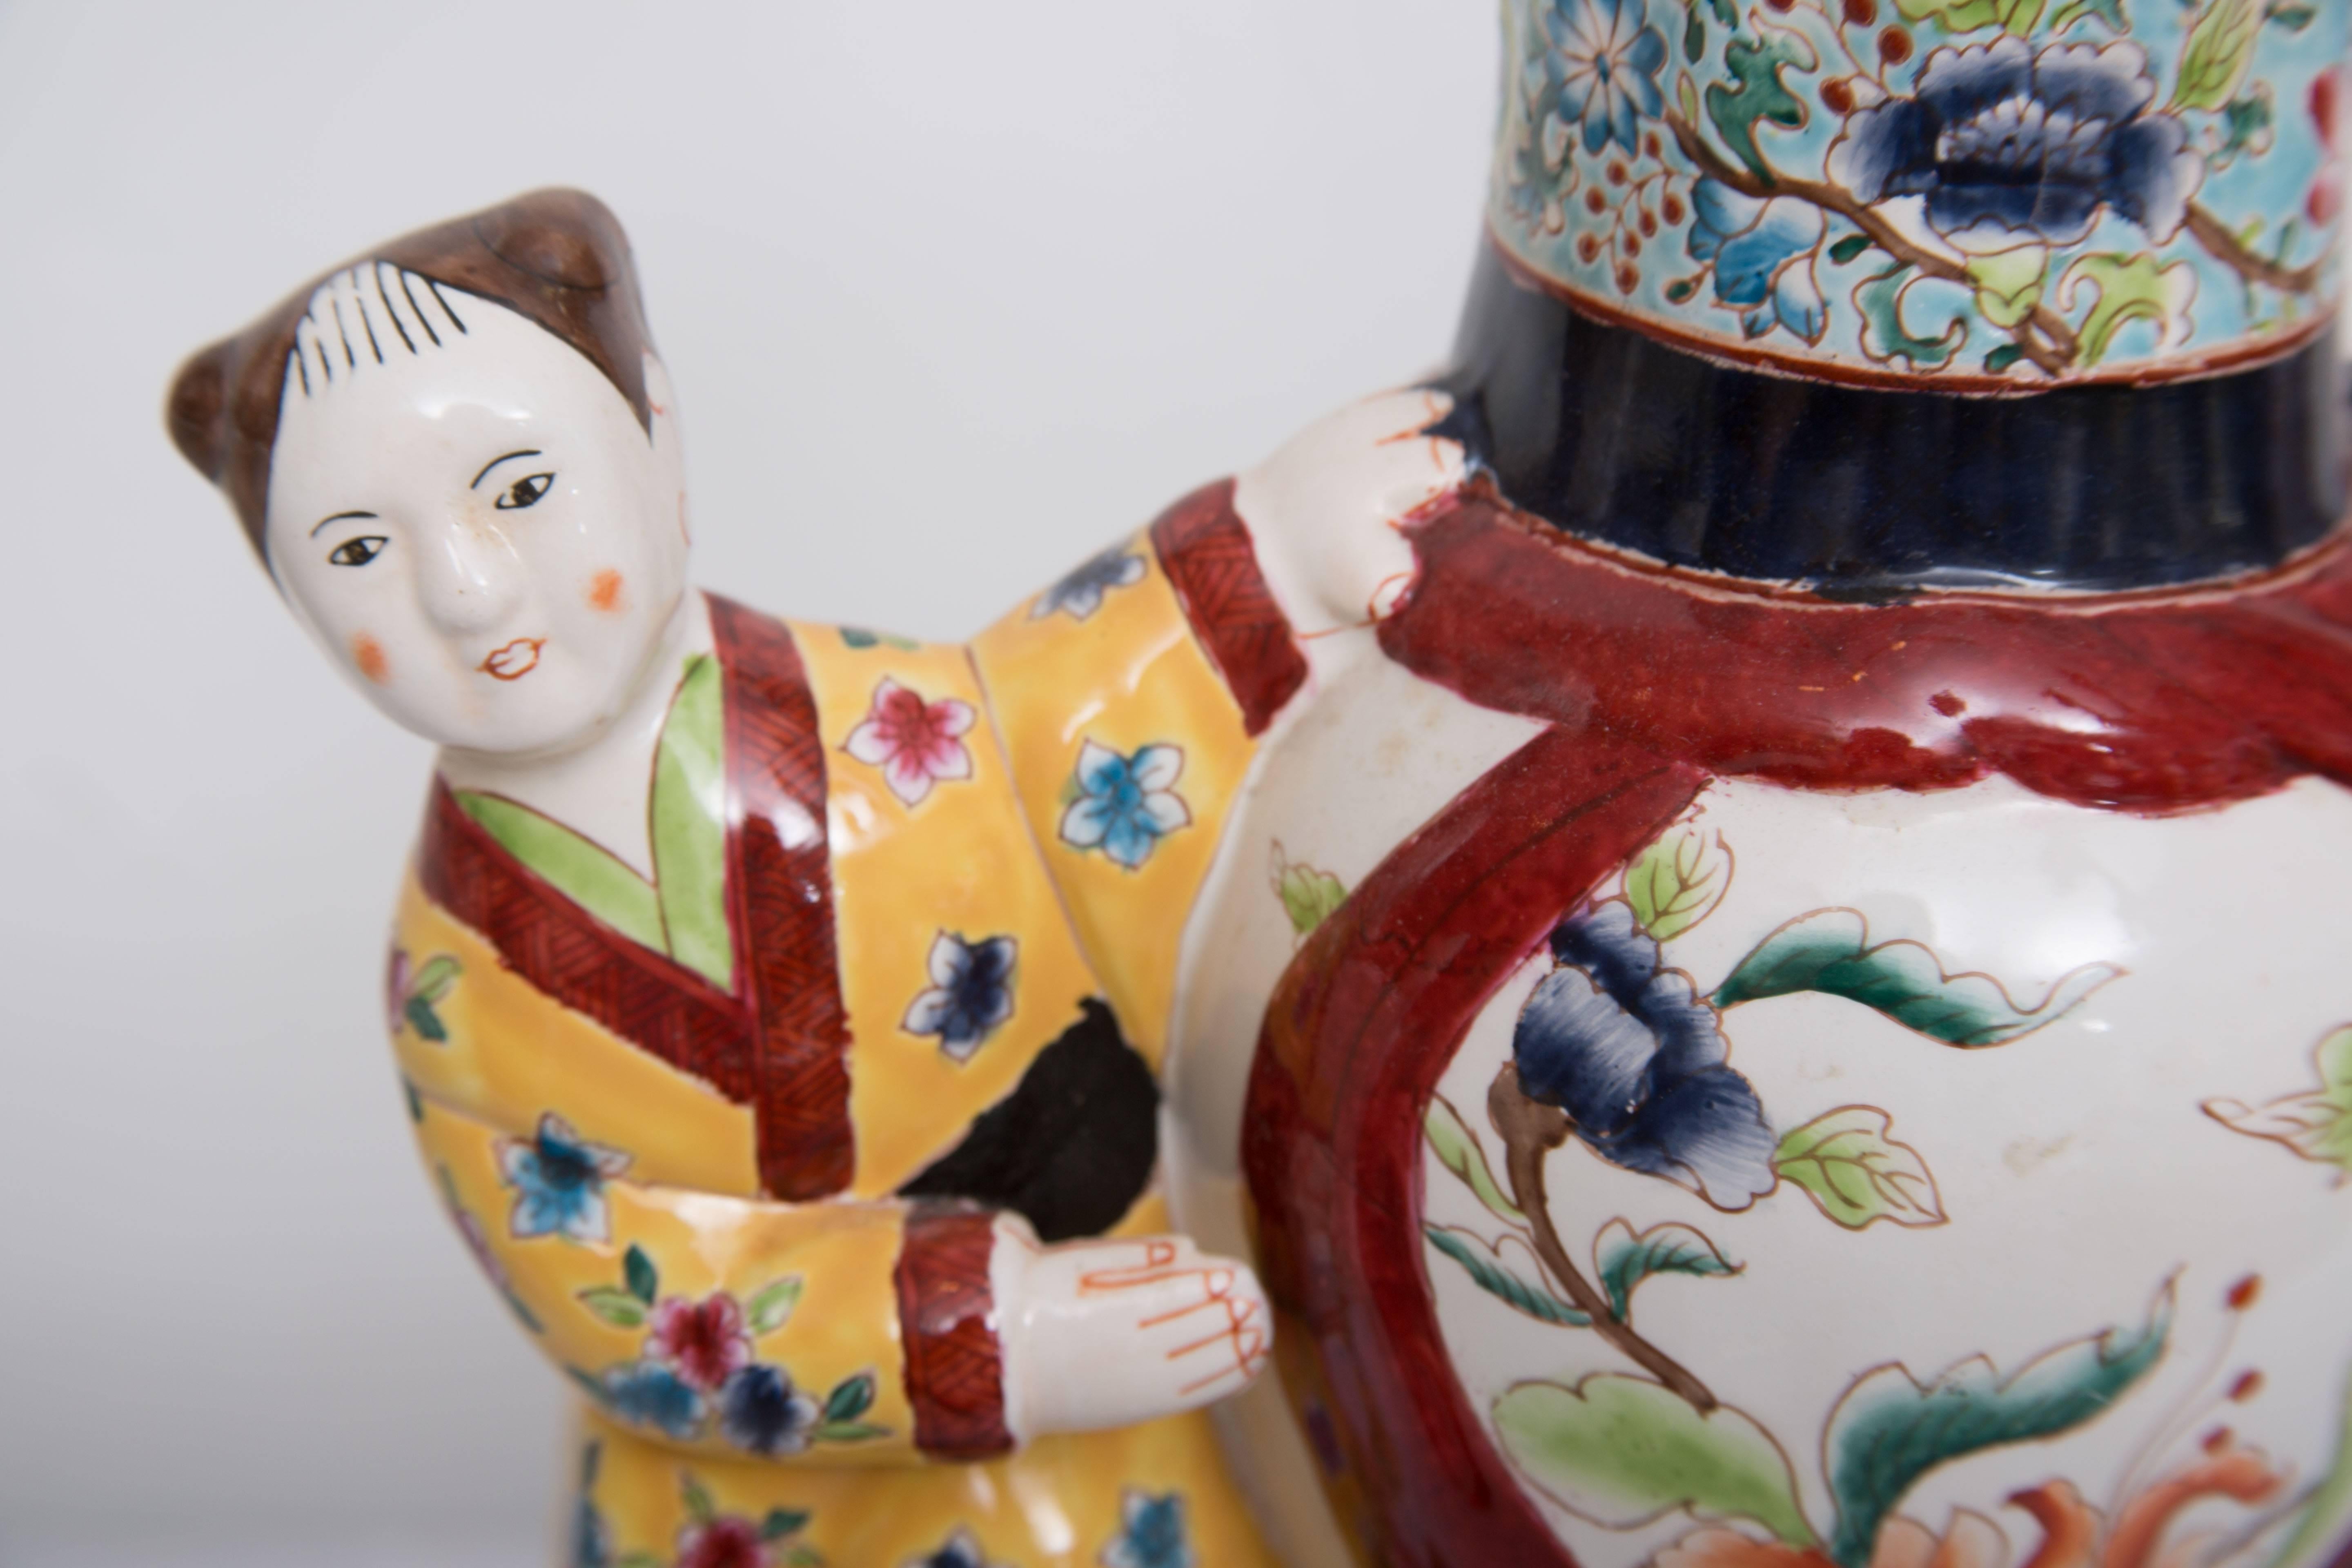 Colorful Mid-Century Asian figure dressed in Classic costumes flank a Chinese palace vase in a whimsical pose. These fun and fanciful Mid-Century figurine has been mounted and electrified as high style table lamps, circa mid-20th century.
Only one